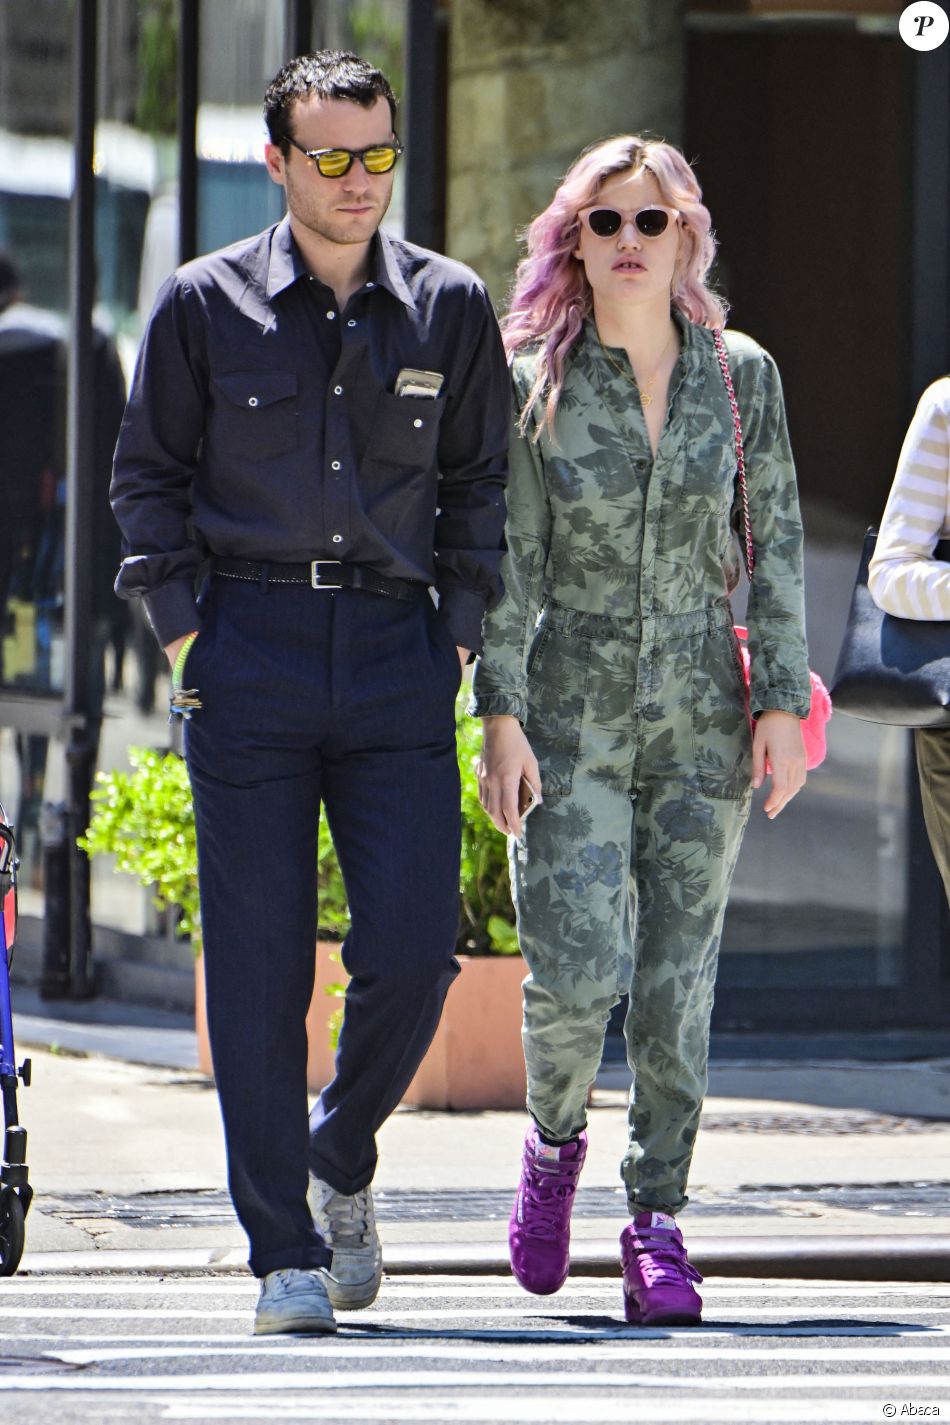 May Jagger et Louis Levy à New York le 22 mai 2019. Purepeople